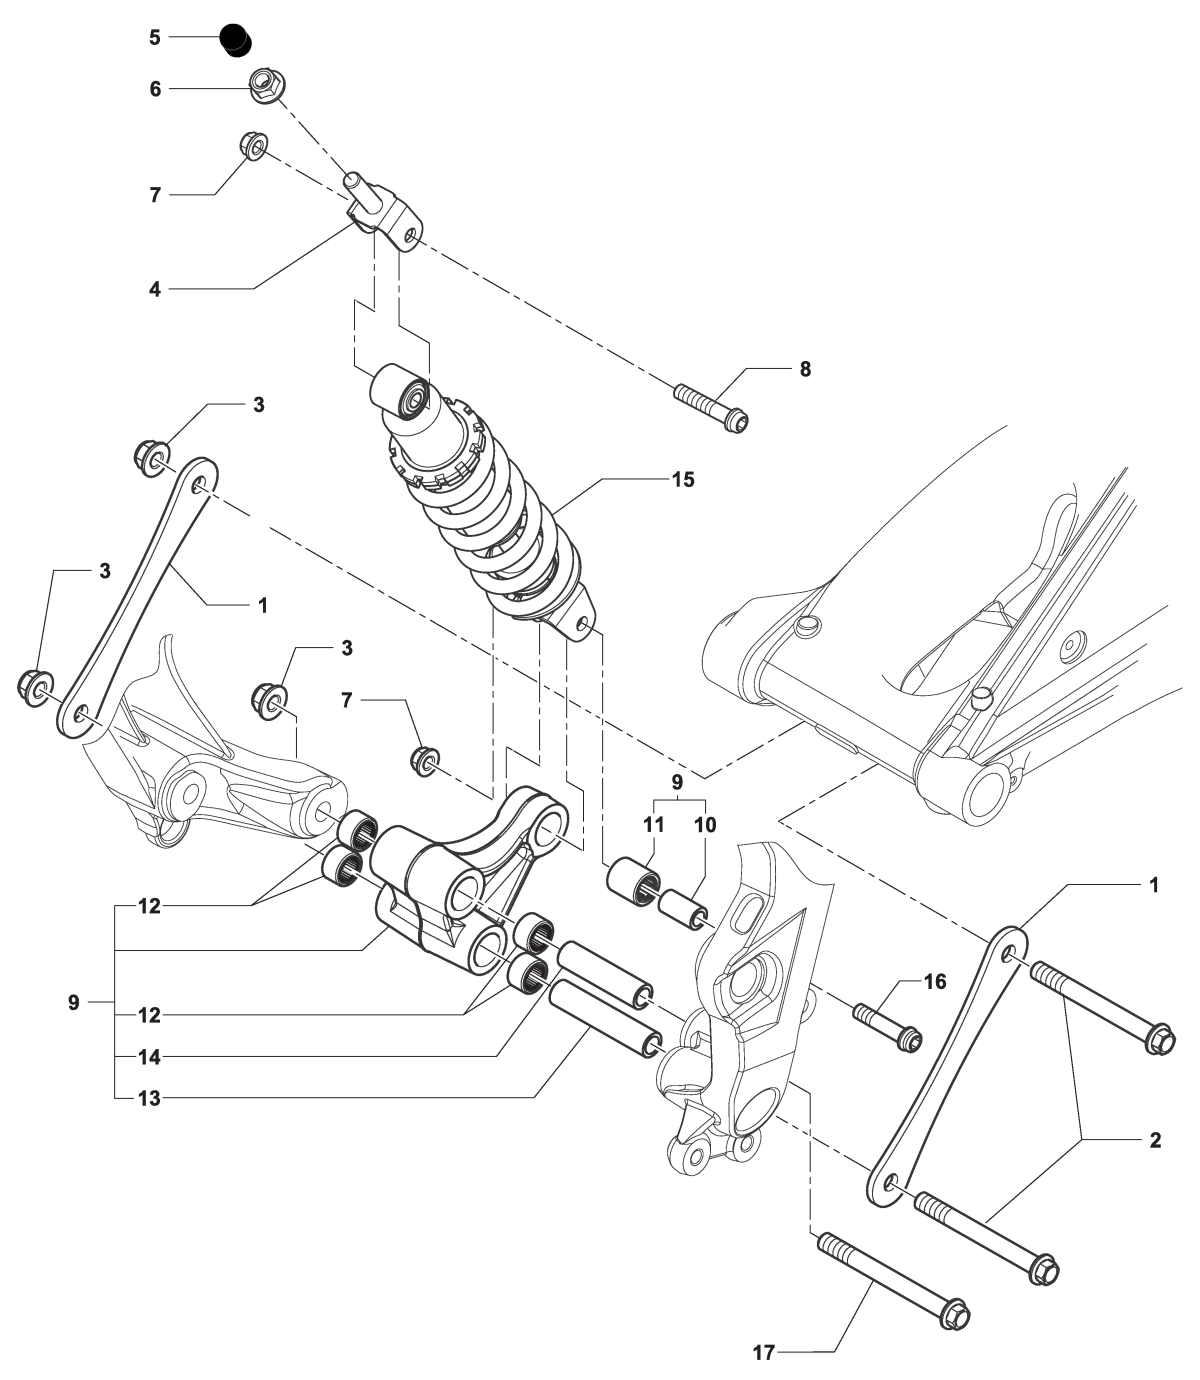 Rear Suspension Assembly


